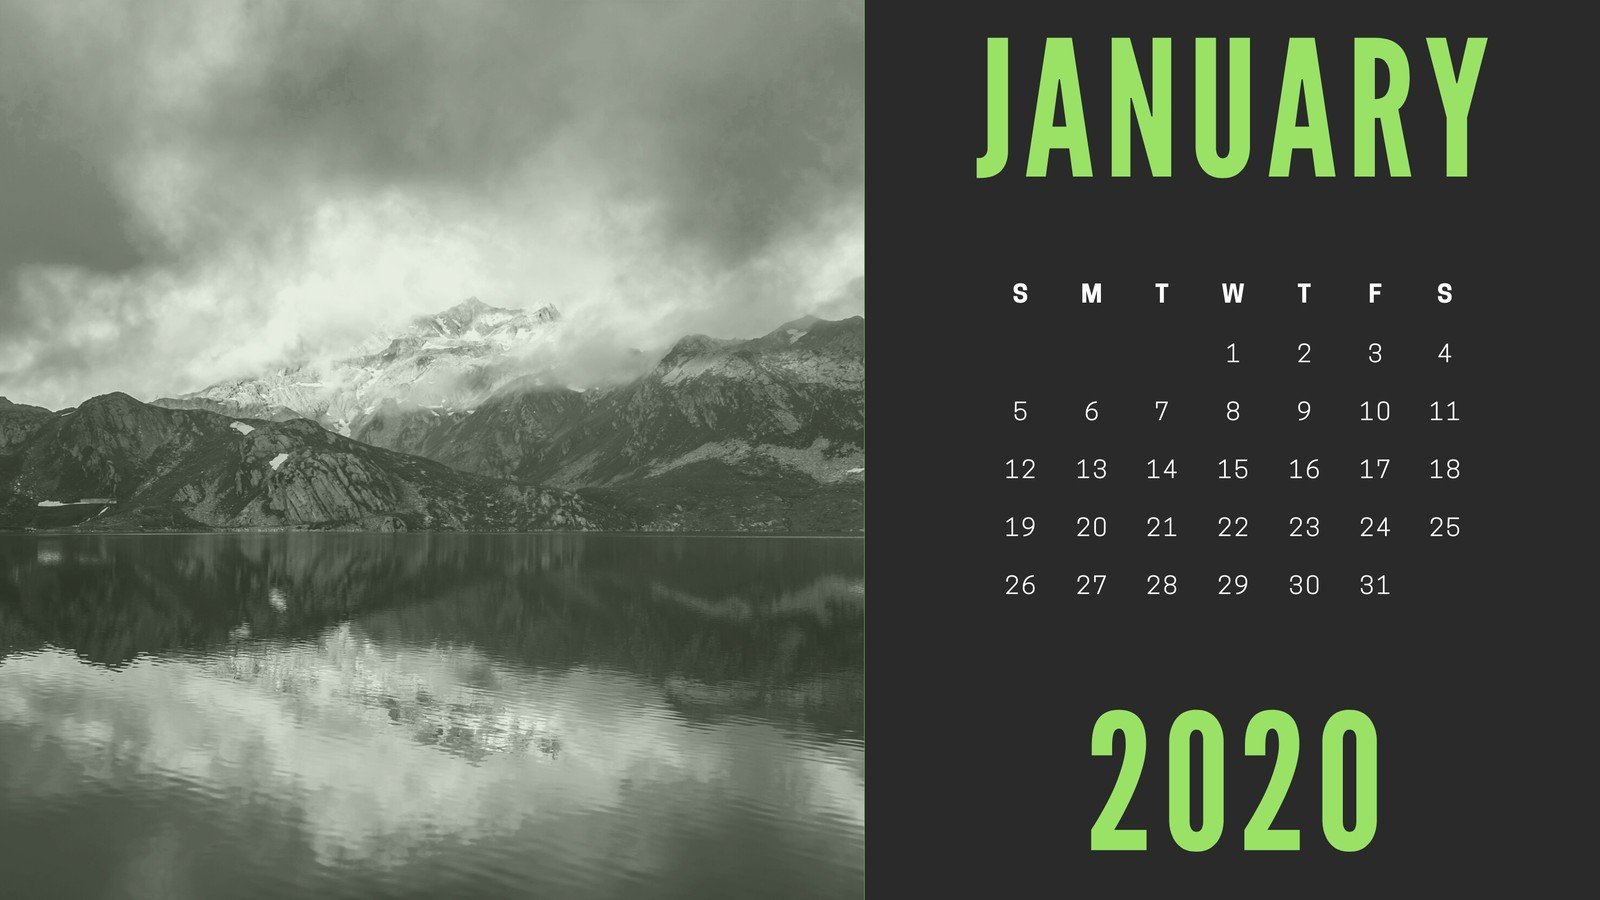 Black and Green with Grayscale Landscape Photos Daily Calendar